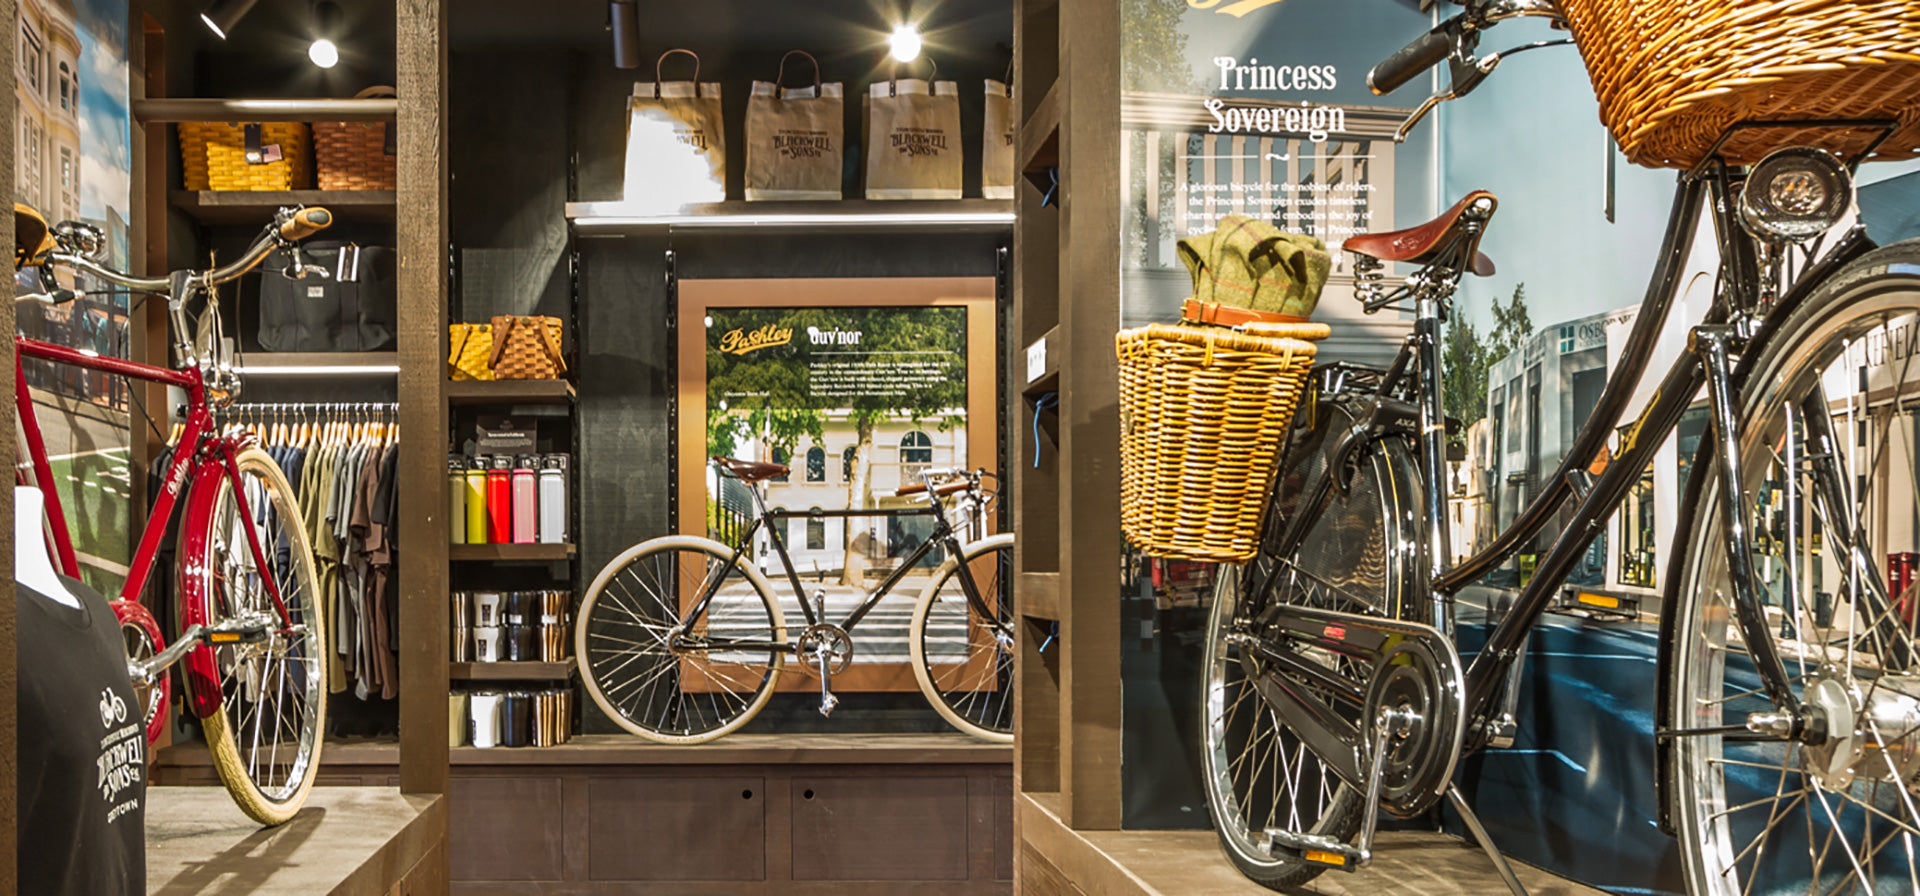 Pashley bicycles on display in a retro styled bicycle shop called Blackwell and Sons in New Zealand.